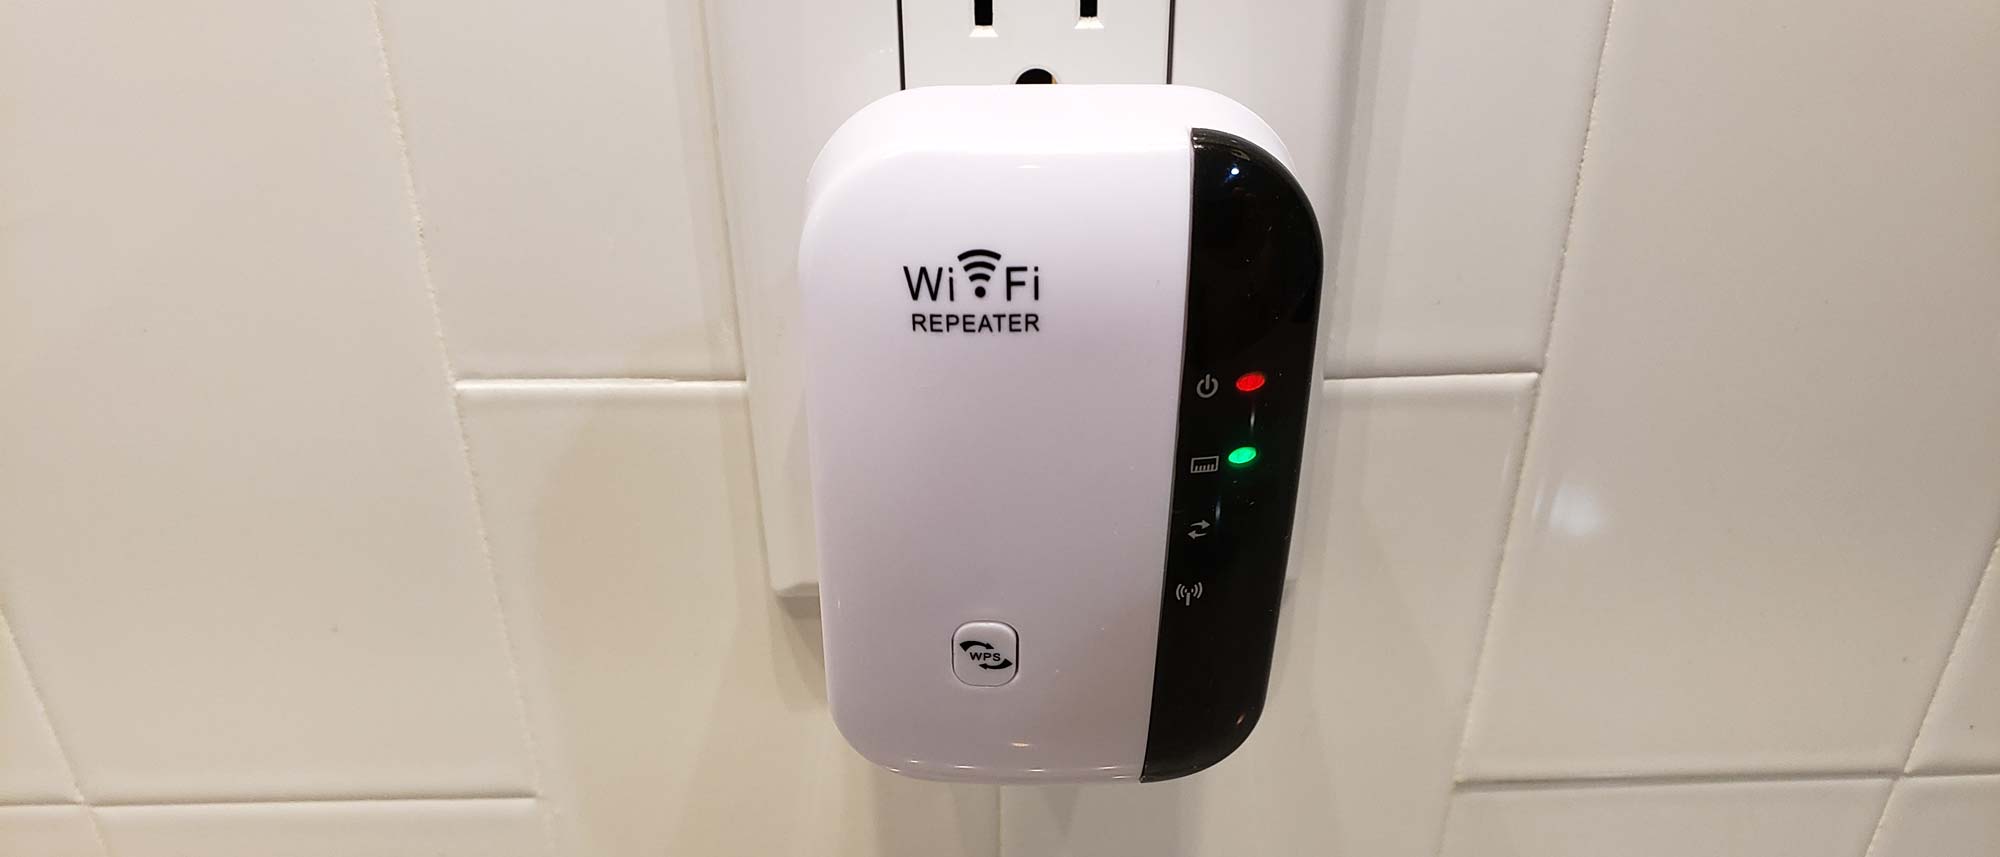 What is a WiFi repeater?